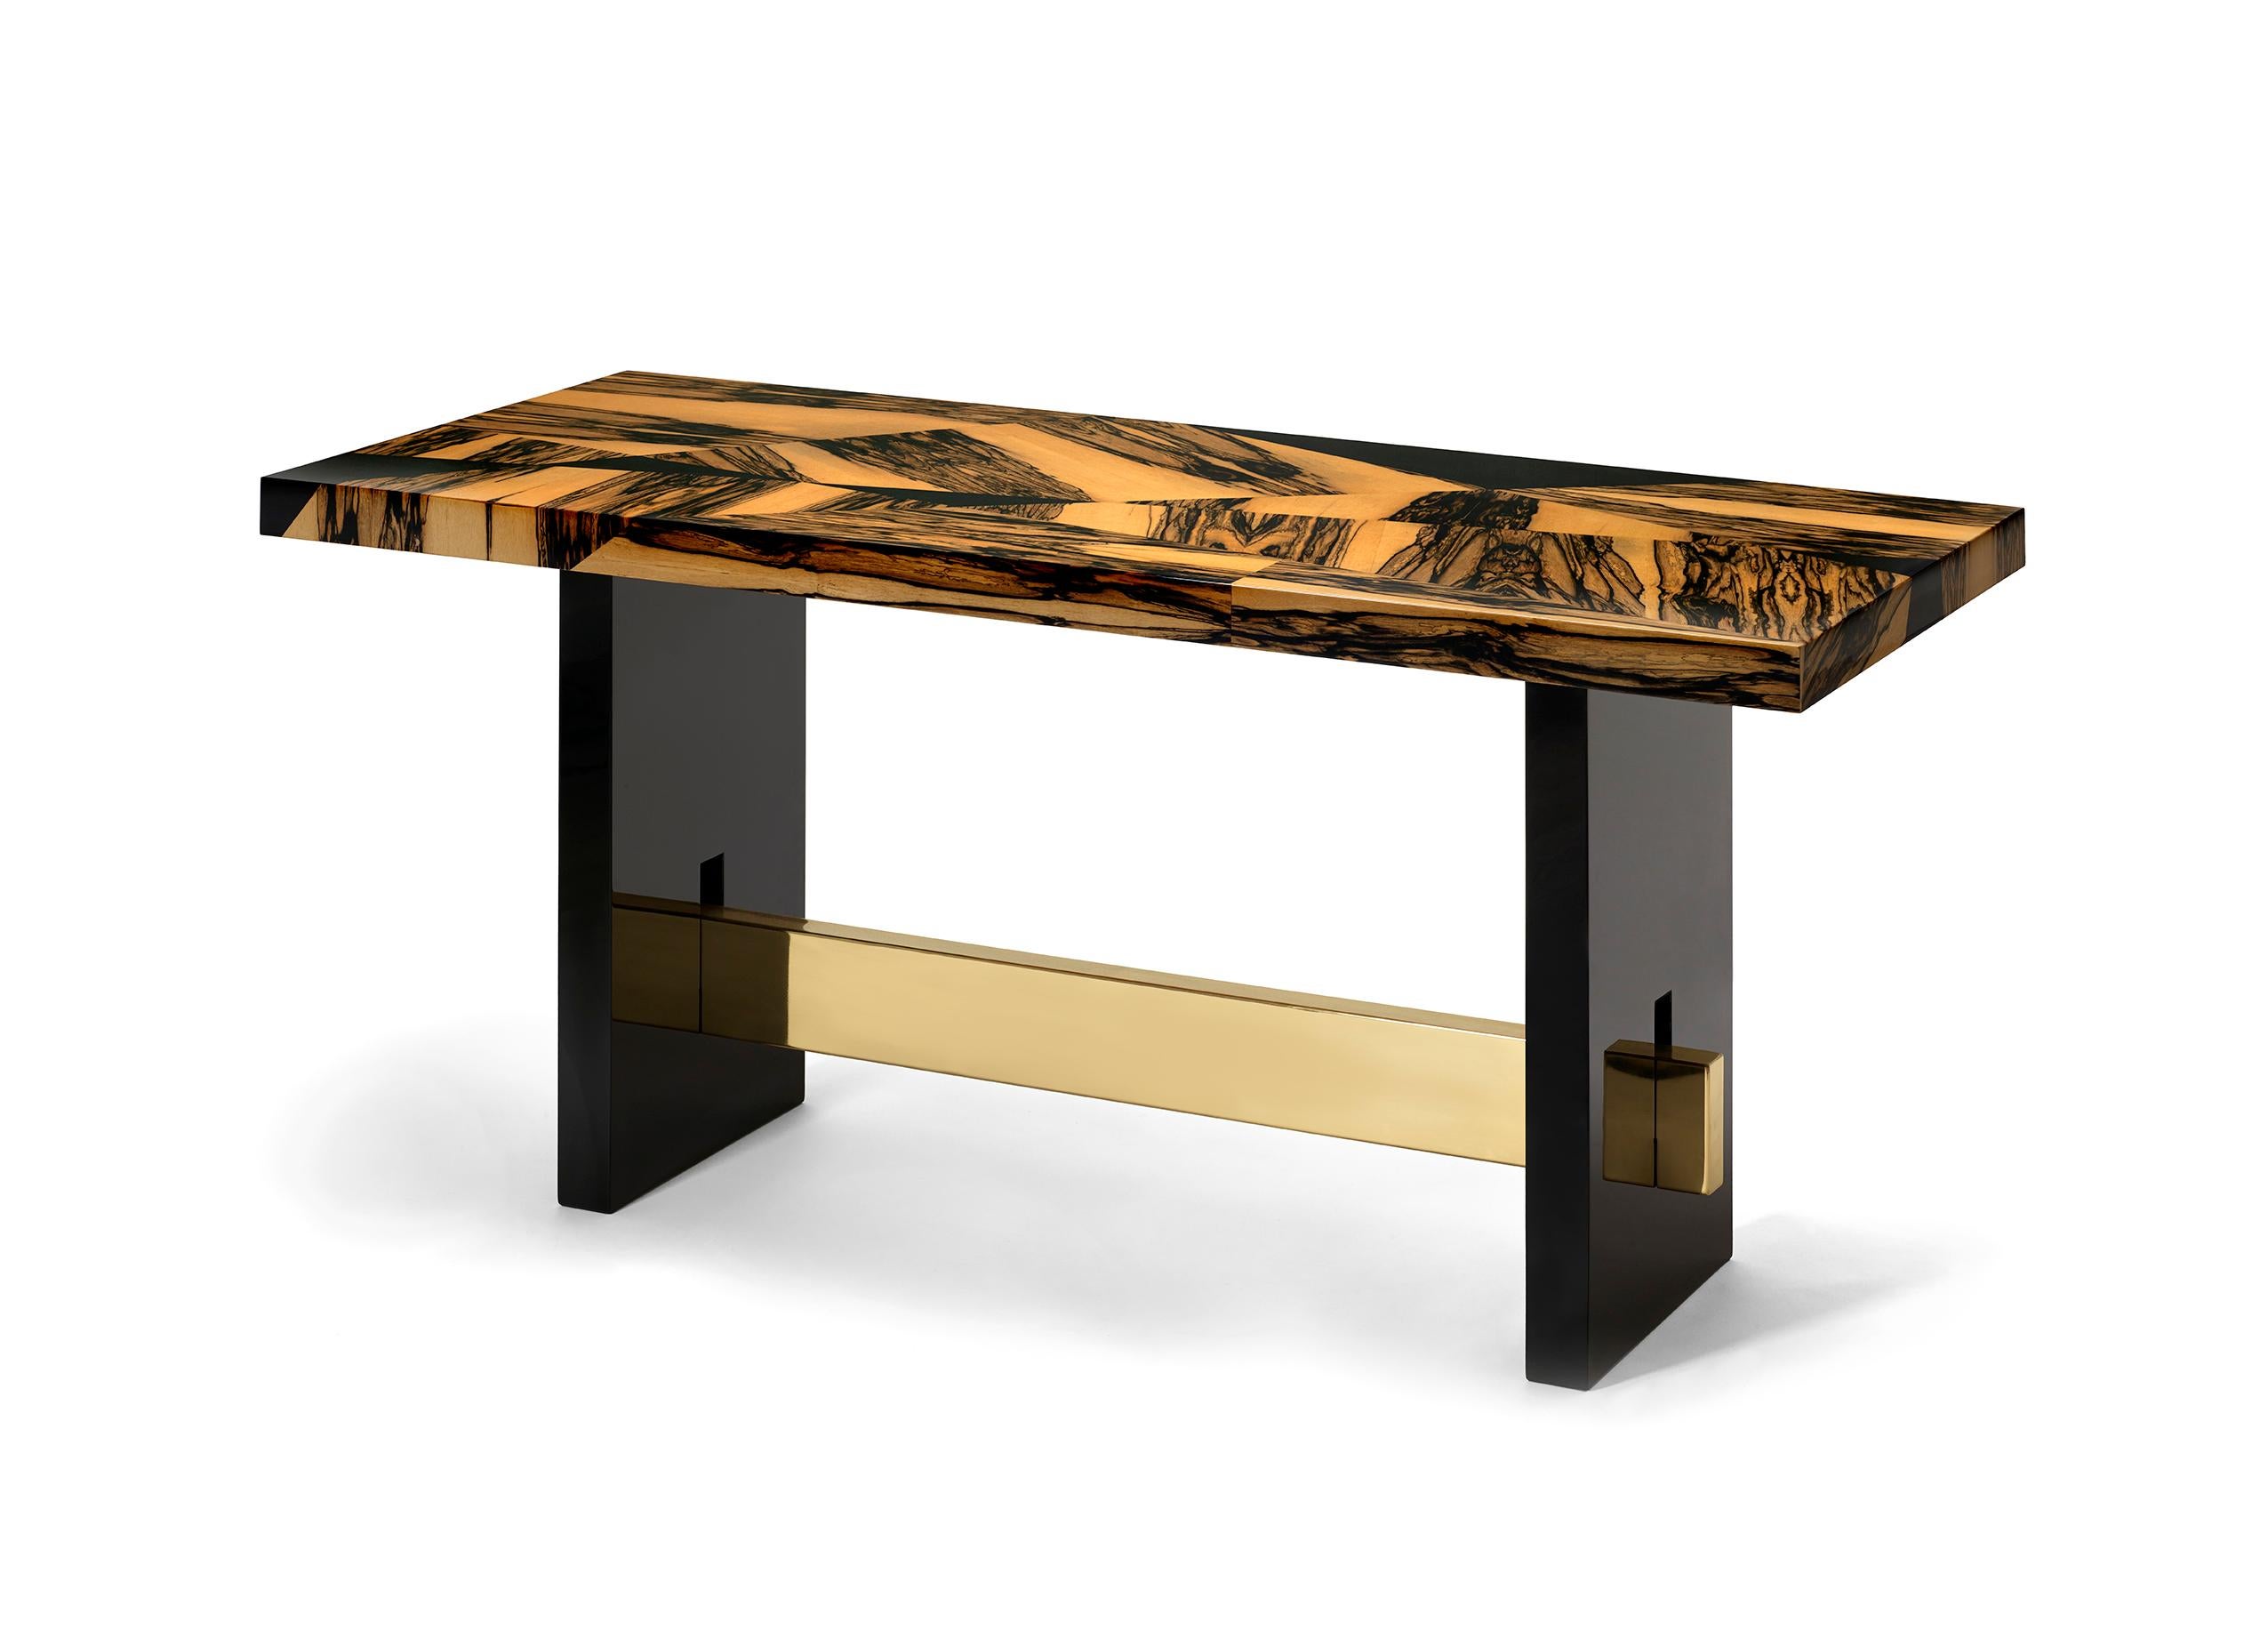 Geometry Console Table, Ebony Marquetry and Brass Details, Handcrafted by Duistt

The geometry console uses the traditional marquetry technique in a contemporary design. The result of using contrasting woods and/or different orientation of wood